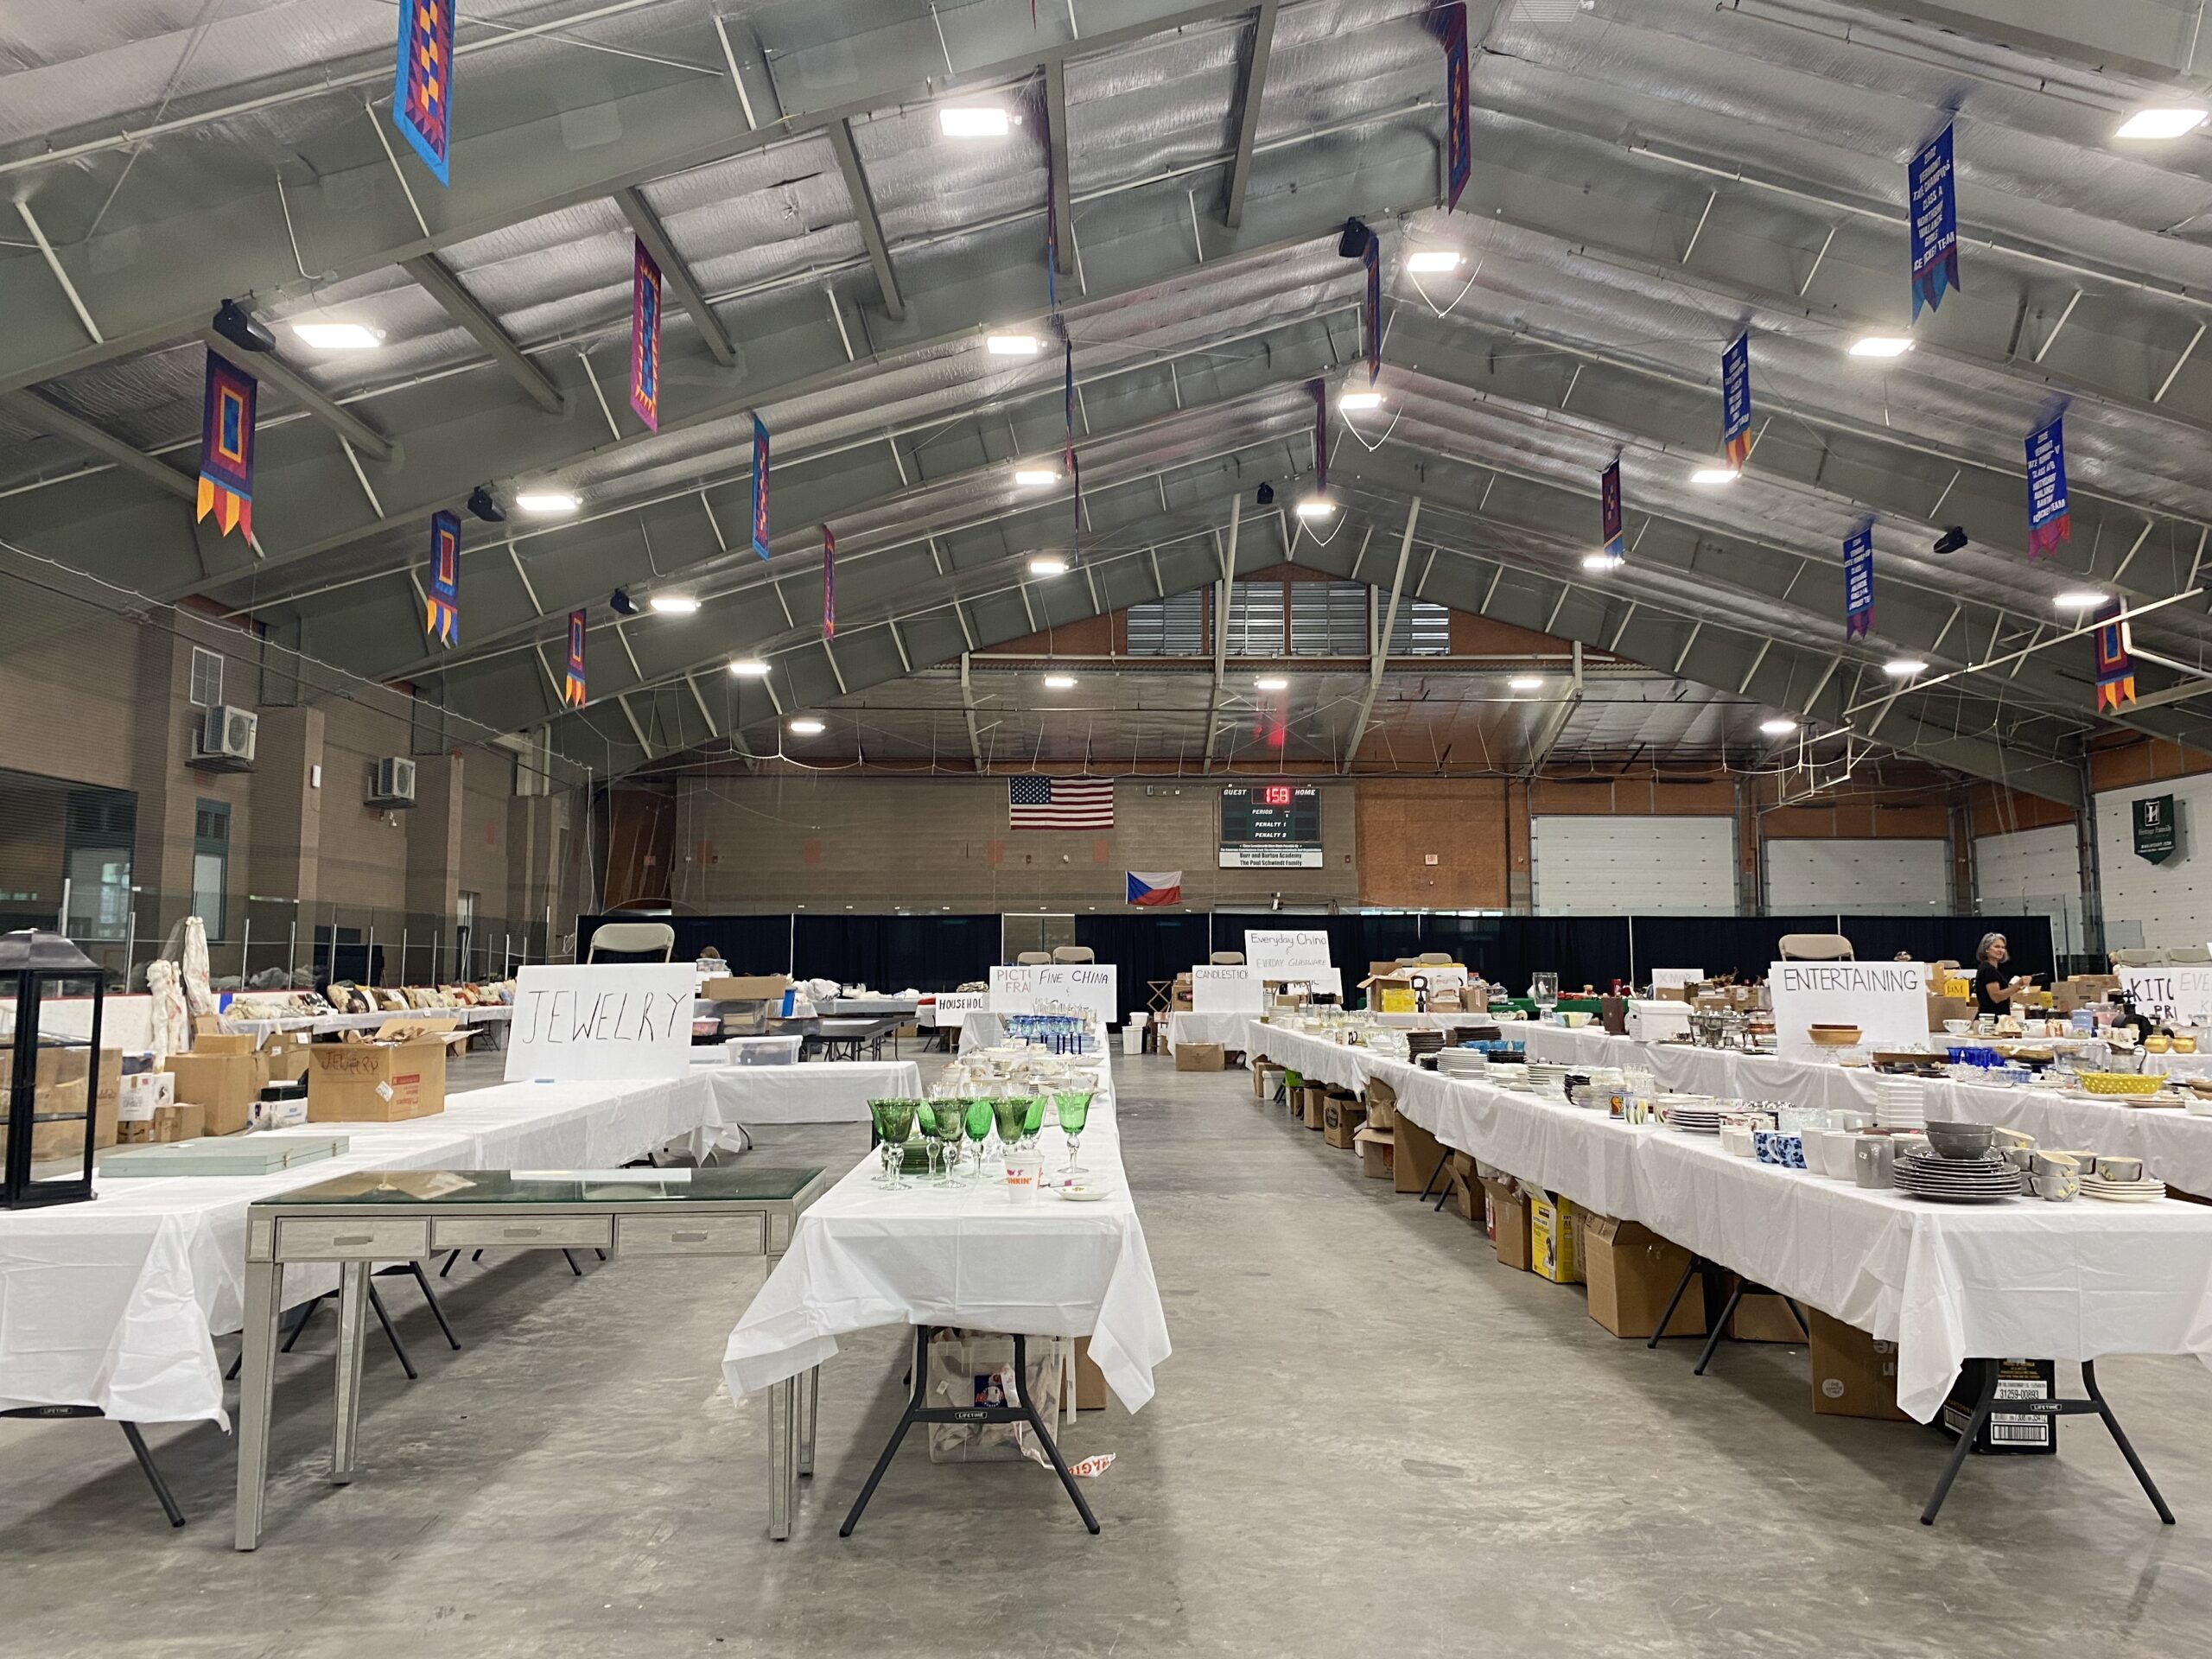 Rows of long tables with white tablecloths holding antiques and other wares fill a large gymnasium.